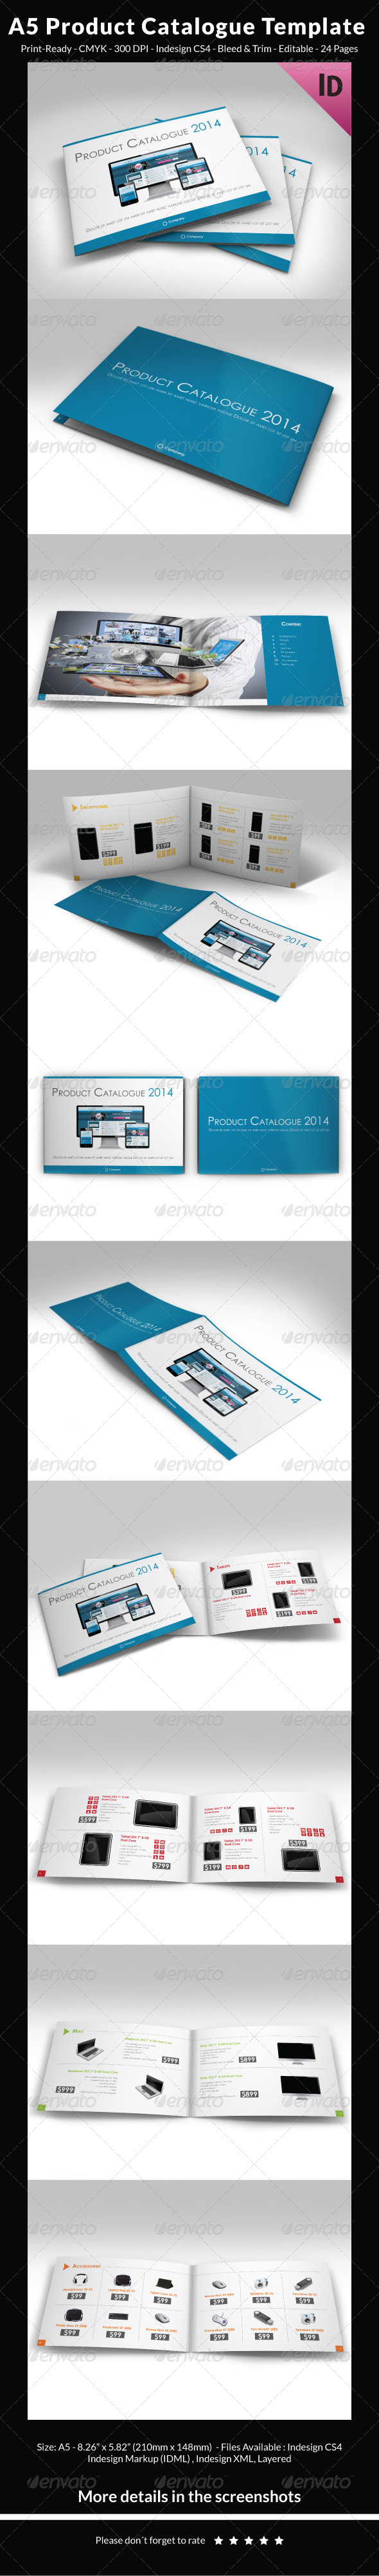 A5 Product Catalogue Template by carlos_fernando | GraphicRiver